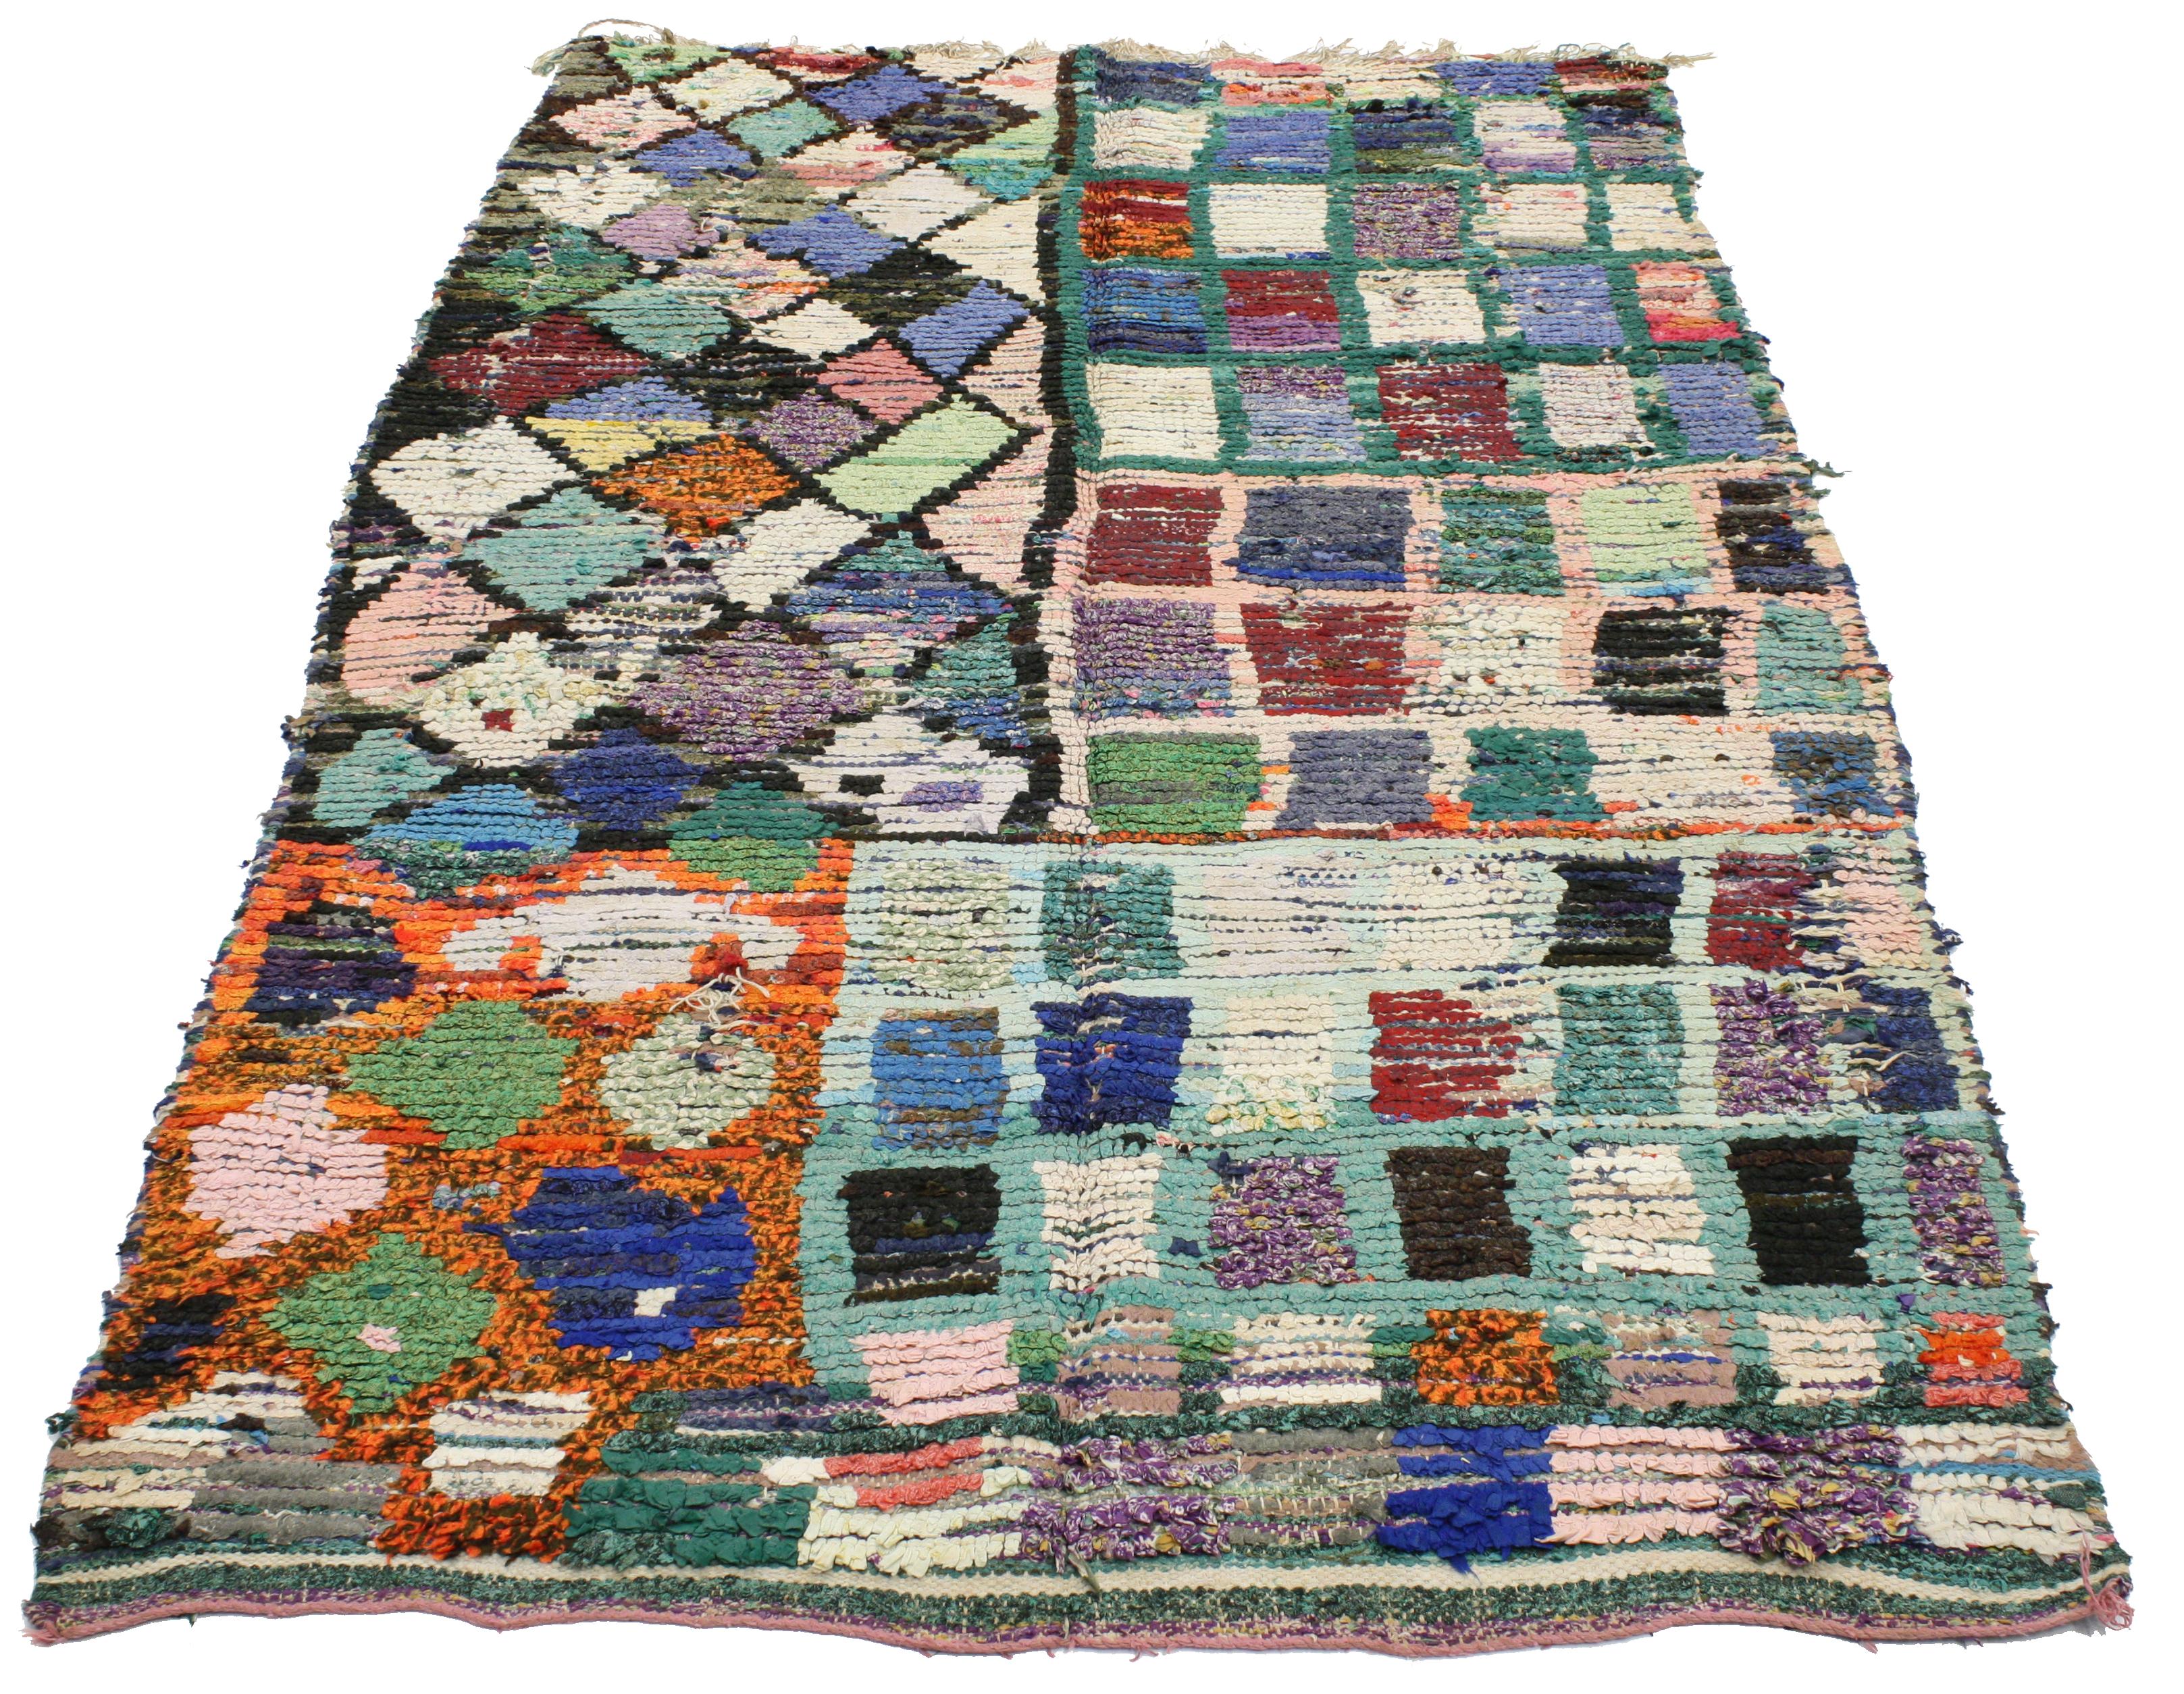 Hand-Knotted Vintage Berber Moroccan Boucherouite Rug, Colorful Moroccan Shag Accent Rug